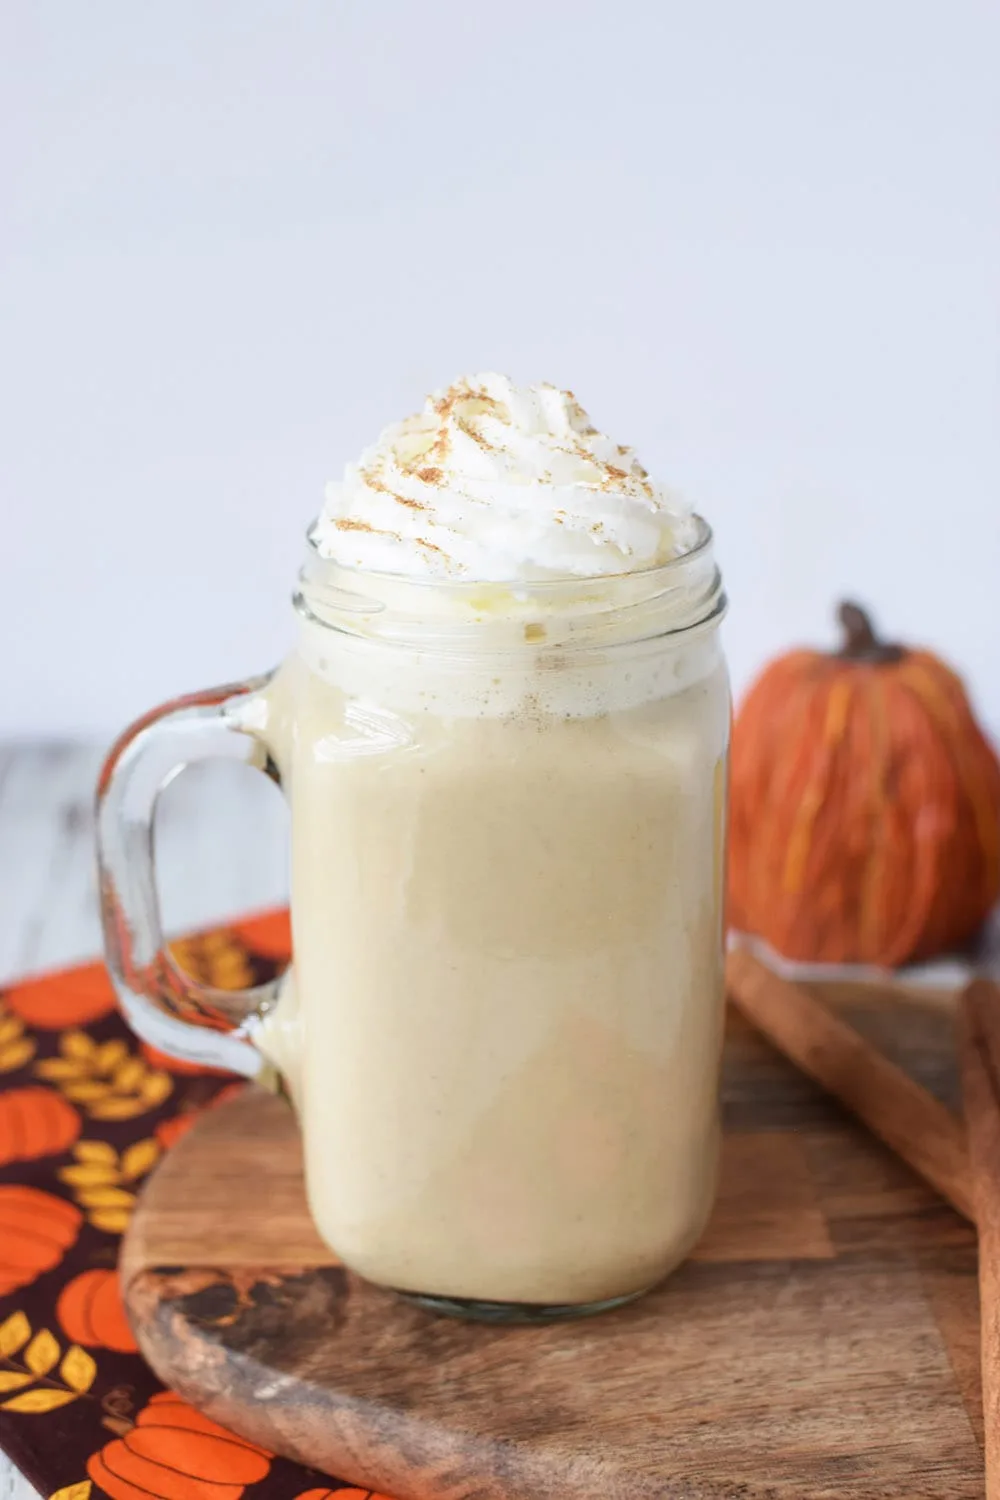 Pumpkin spice latte topped with whipped cream and cinnamon sitting by pumpkins.